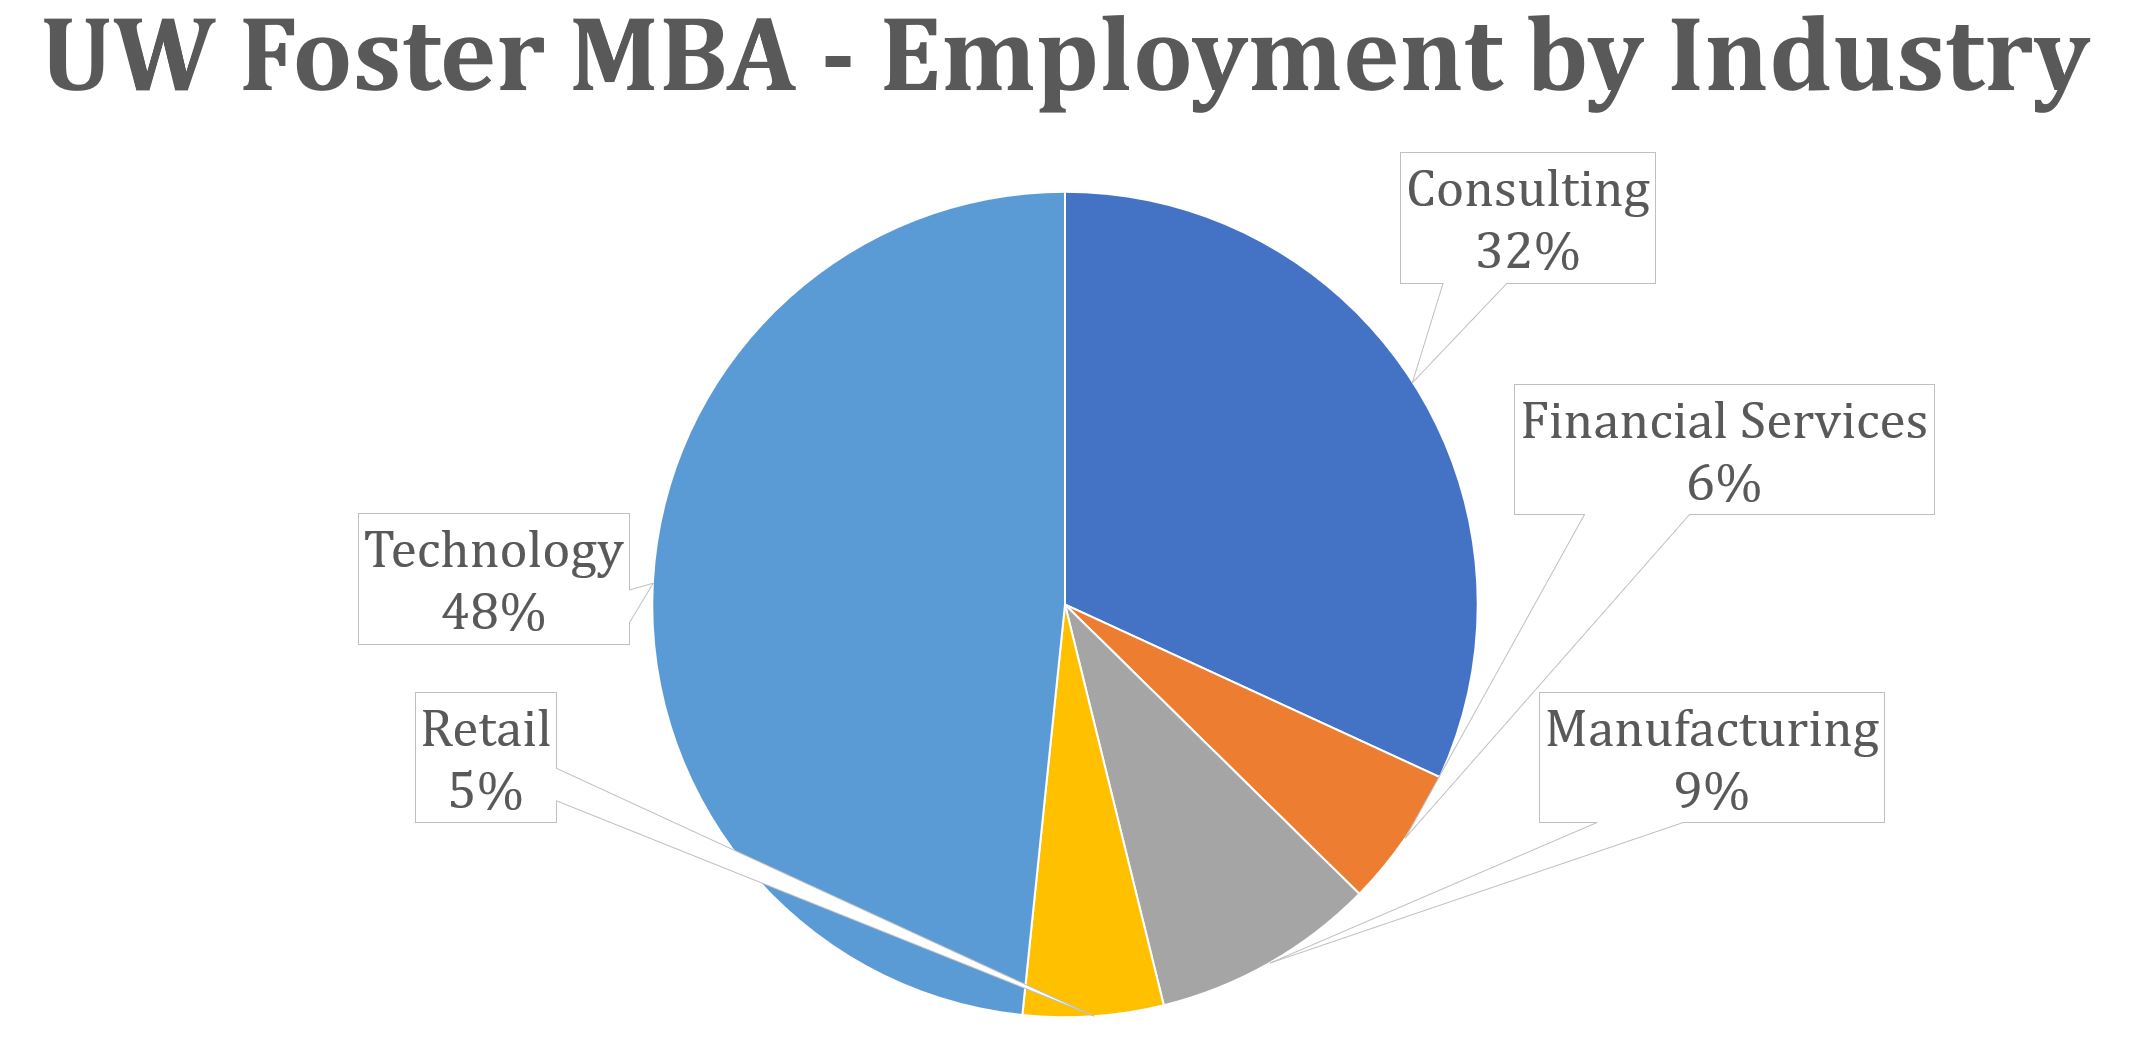 UW Foster MBA - Employment by Industry